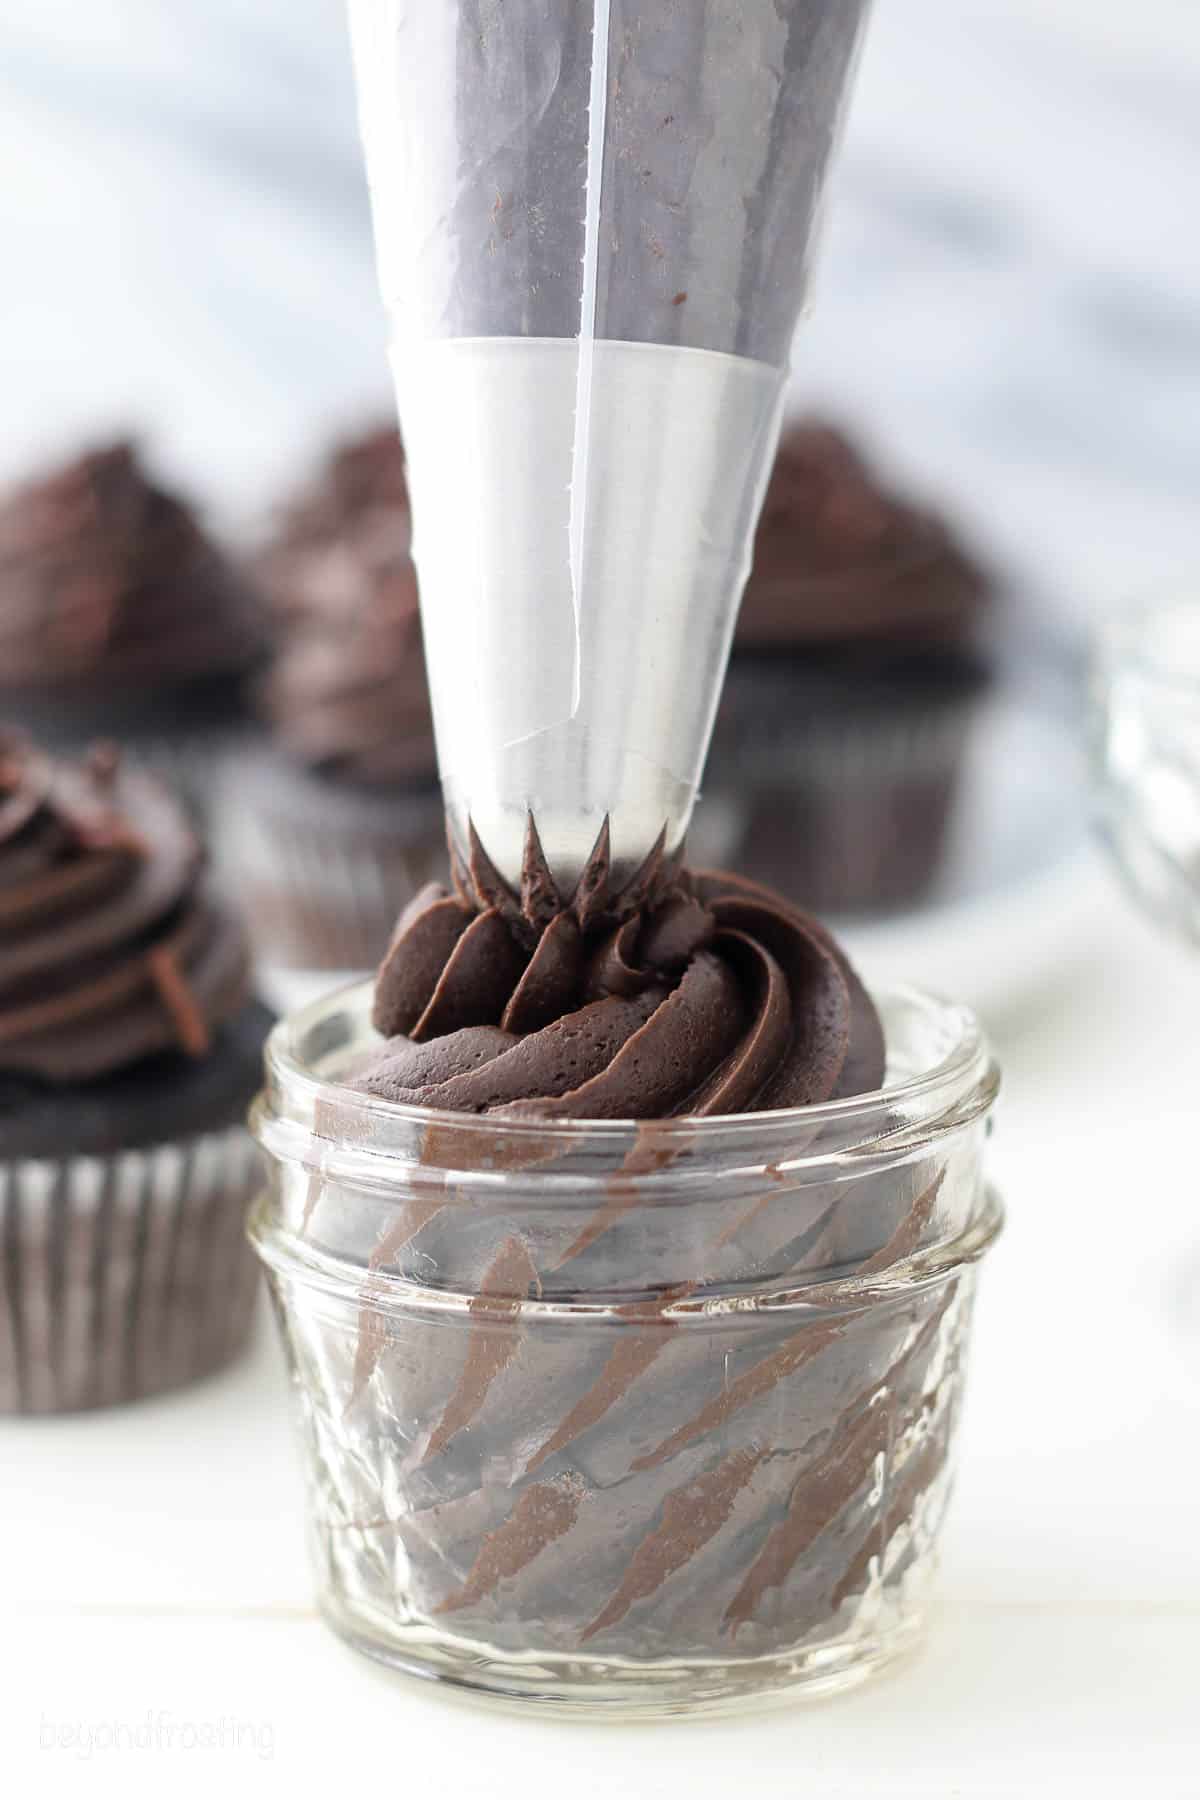 A piping tip pipes chocolate frosting into a glass jar.